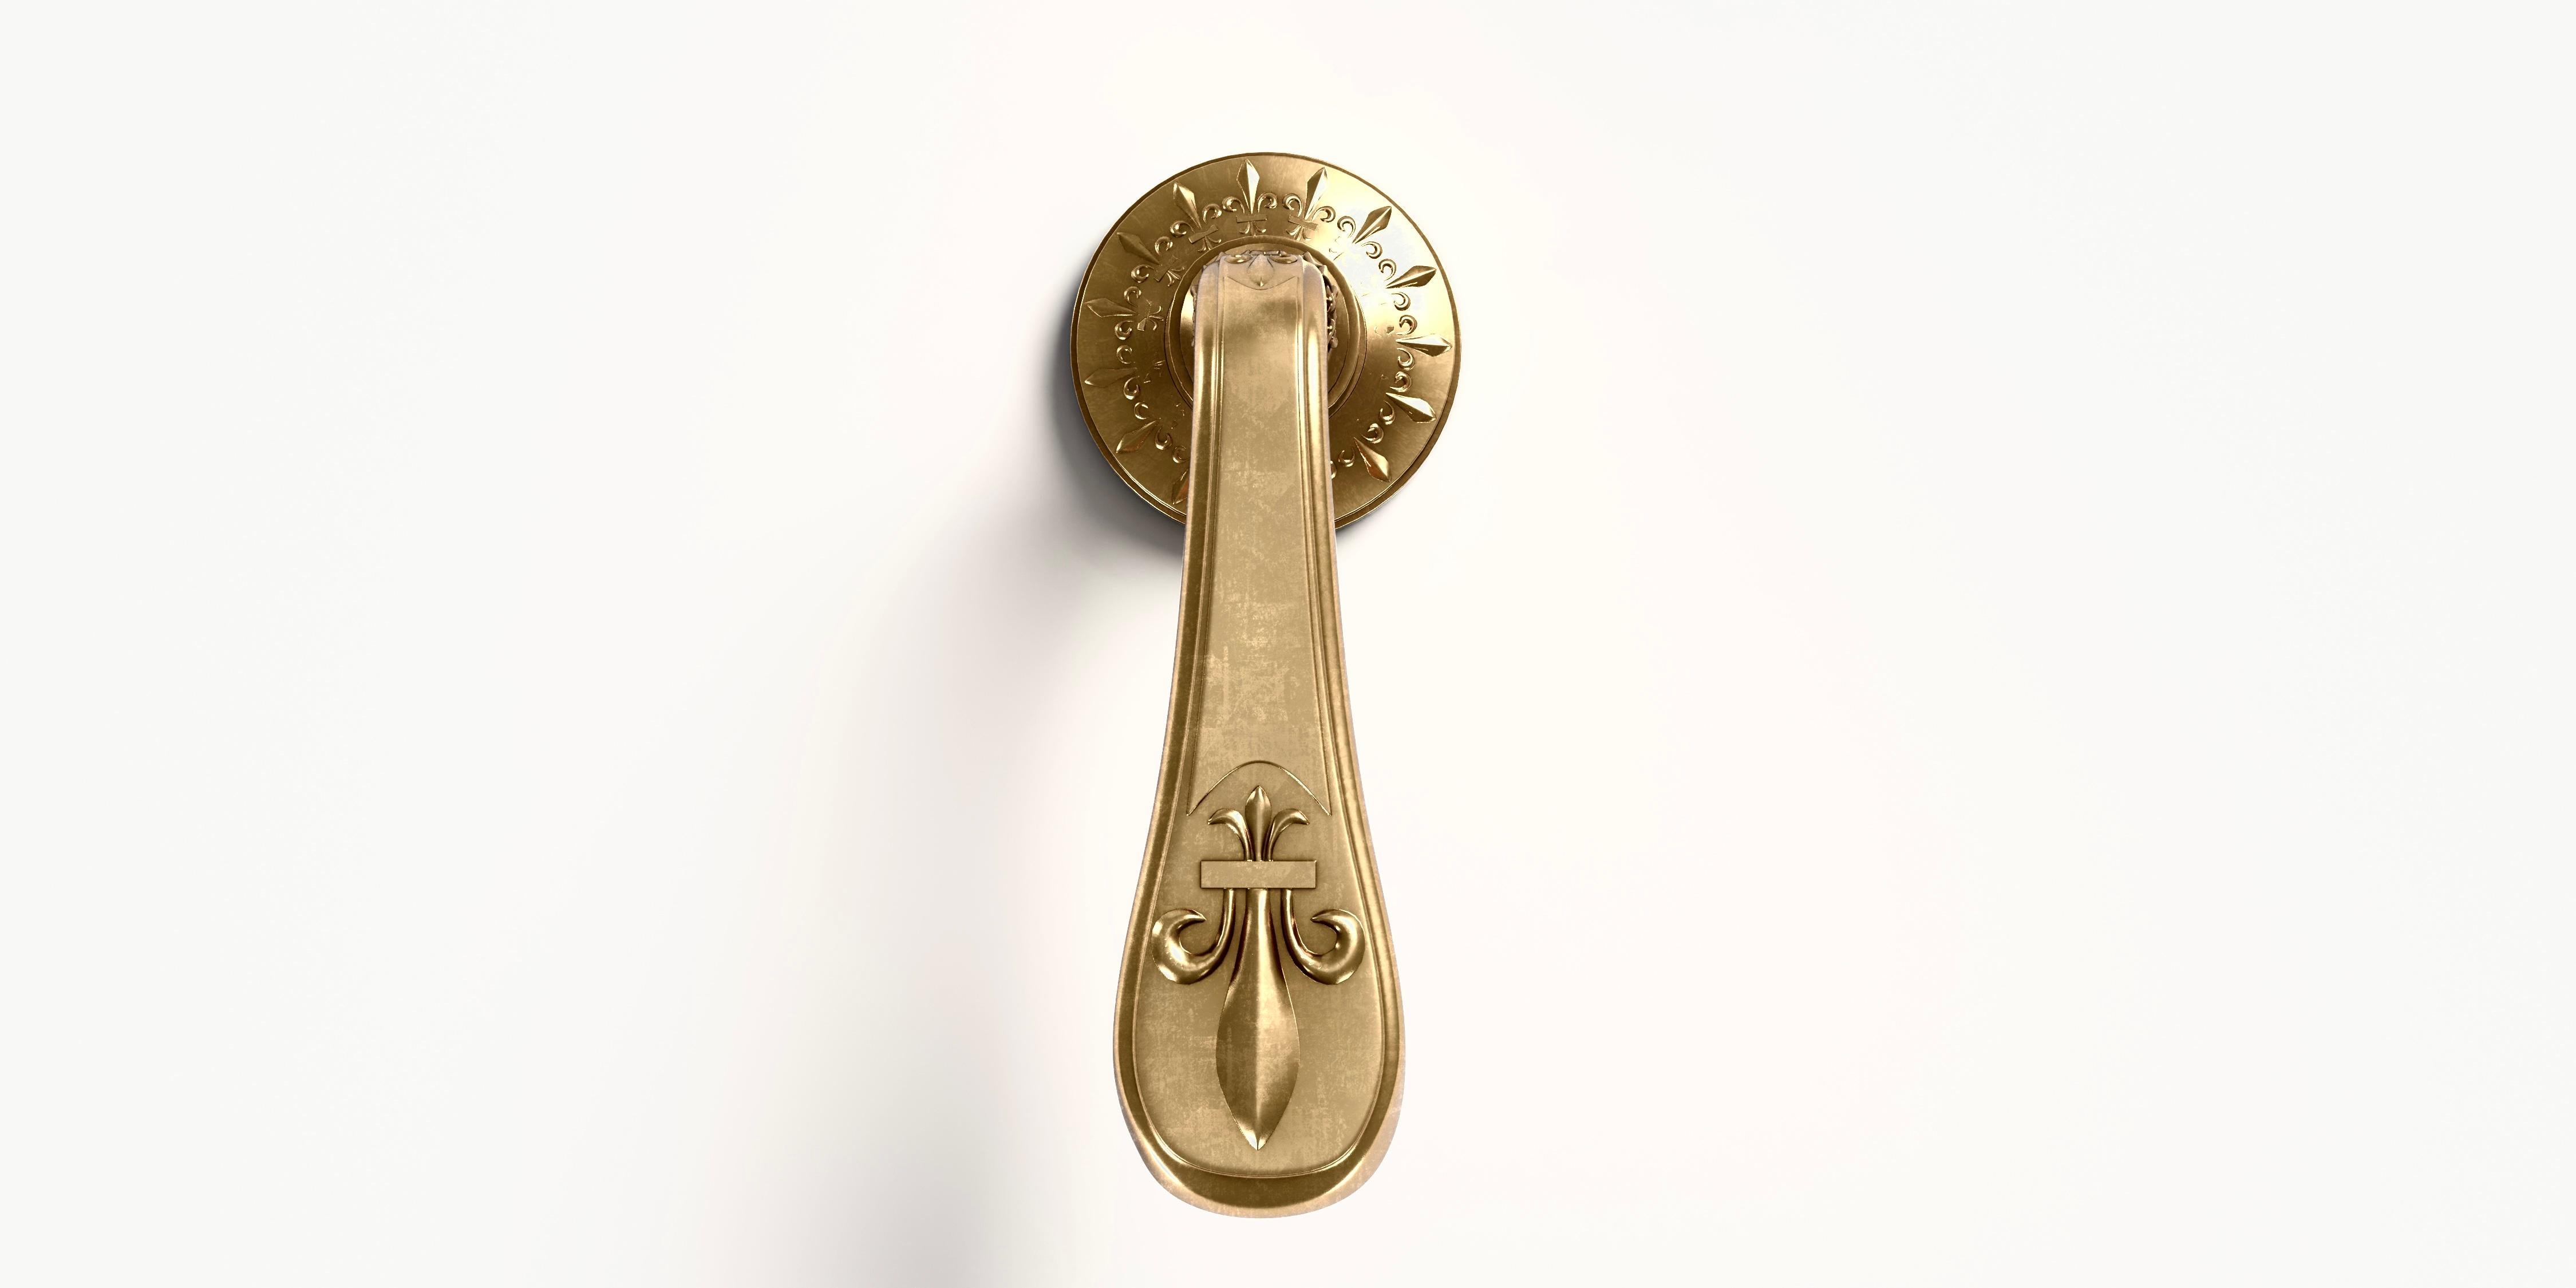 Magnificent door handles with condemned rosette in satin-finish polished brass. 

Entirely hand-crafted by Art bronzier Rémy Garnier (a French heritage company since 1832). 

Fleur de Lys details in the French Chateau spirit. 

